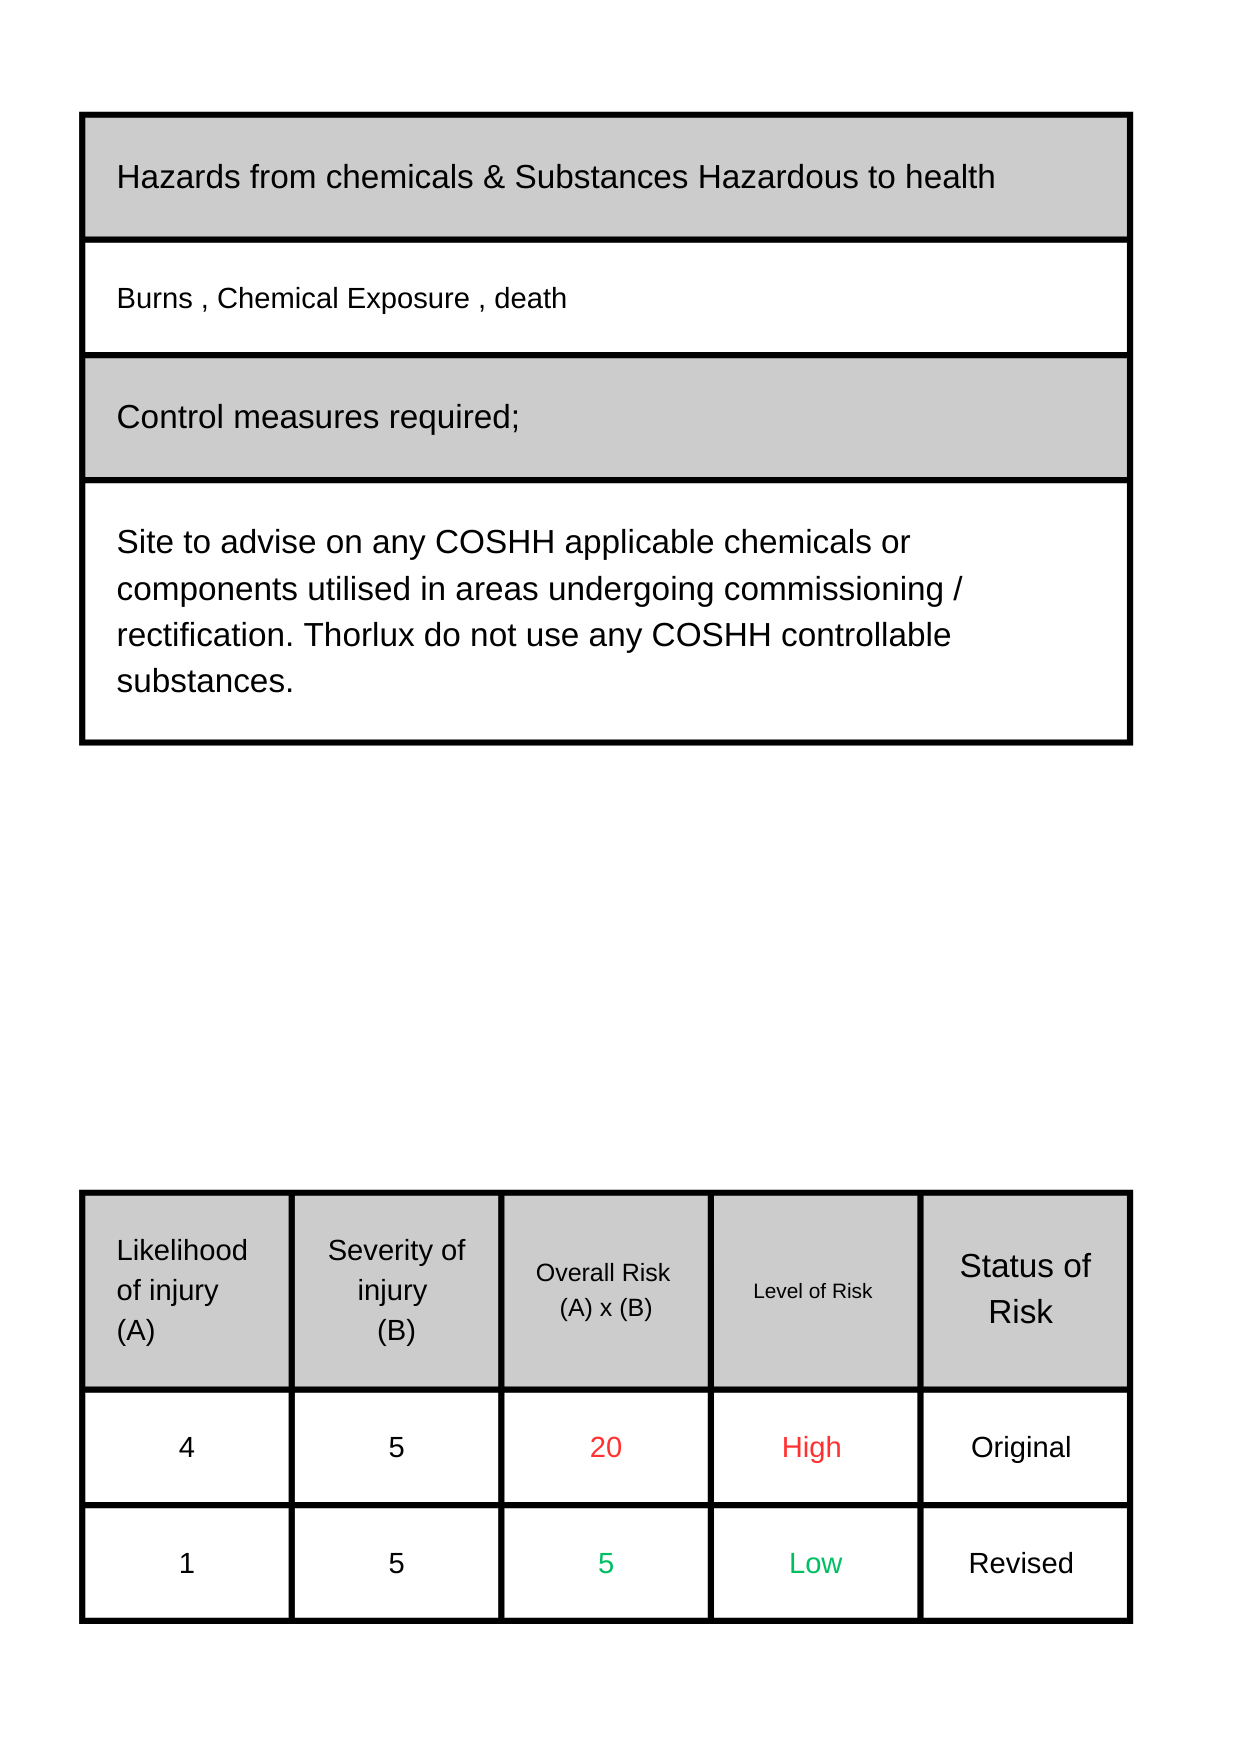 Hazards from general site conditions (16).png